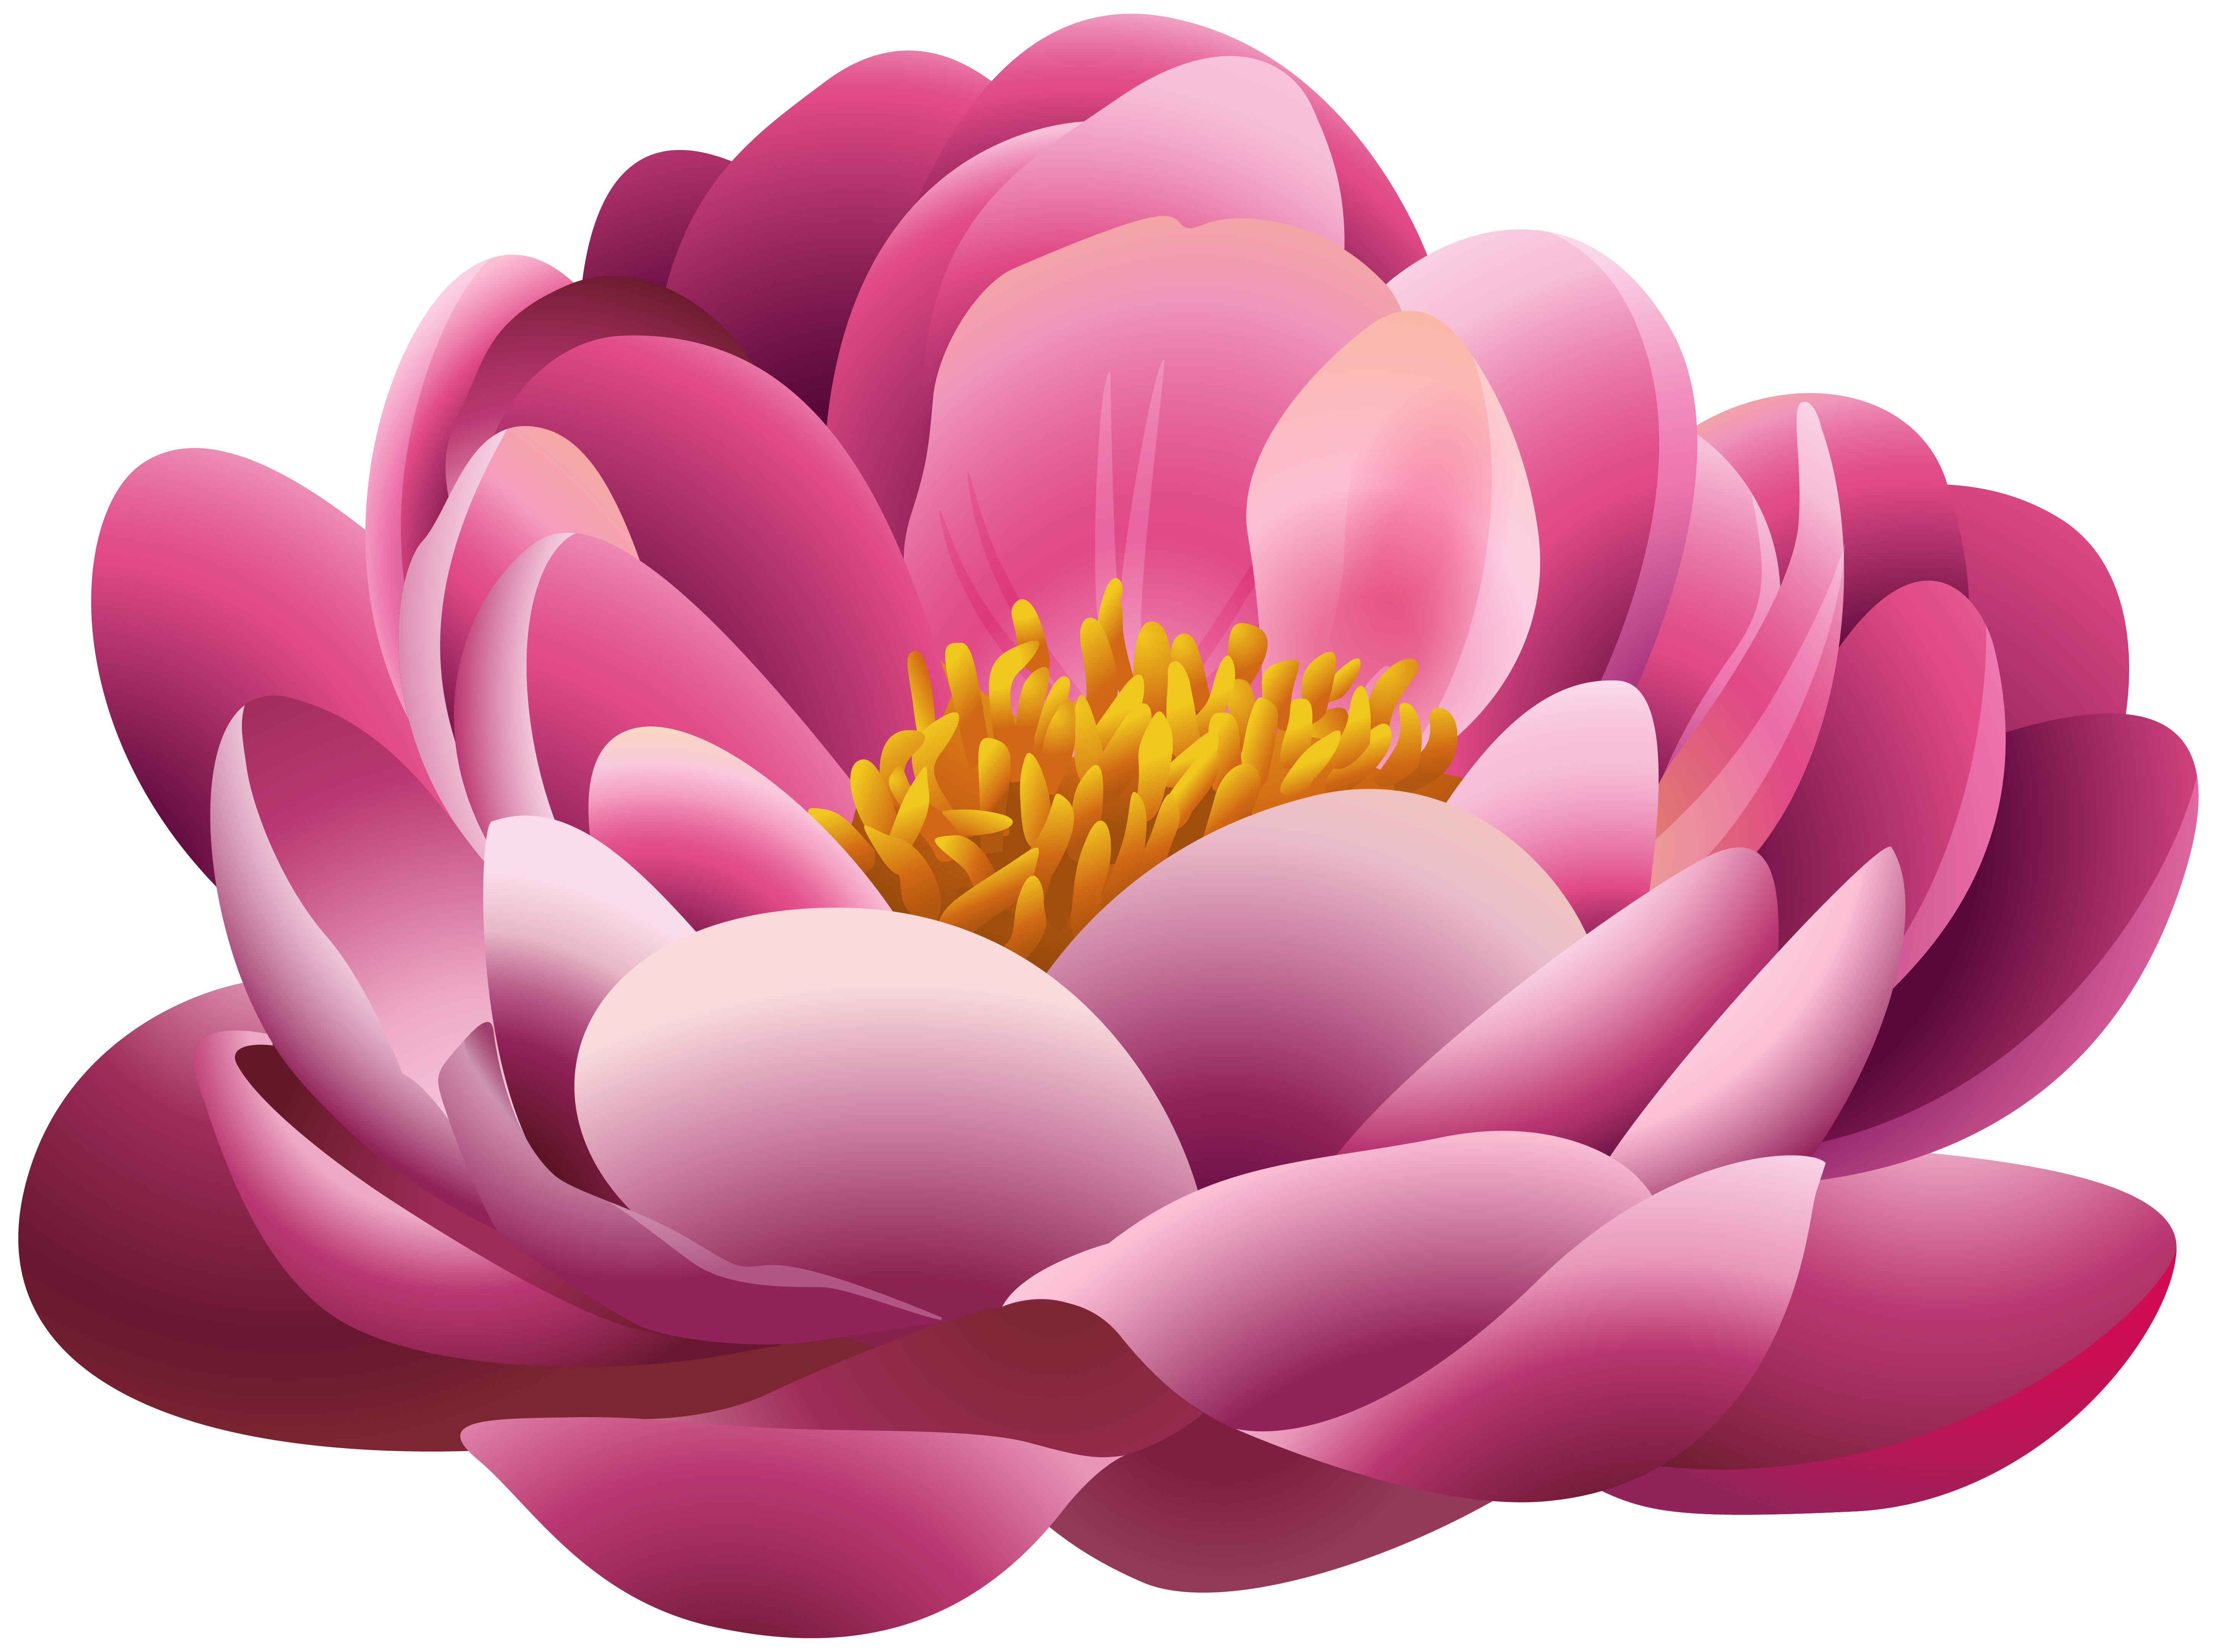 Beautiful Pink Flower PNG Clipart Image